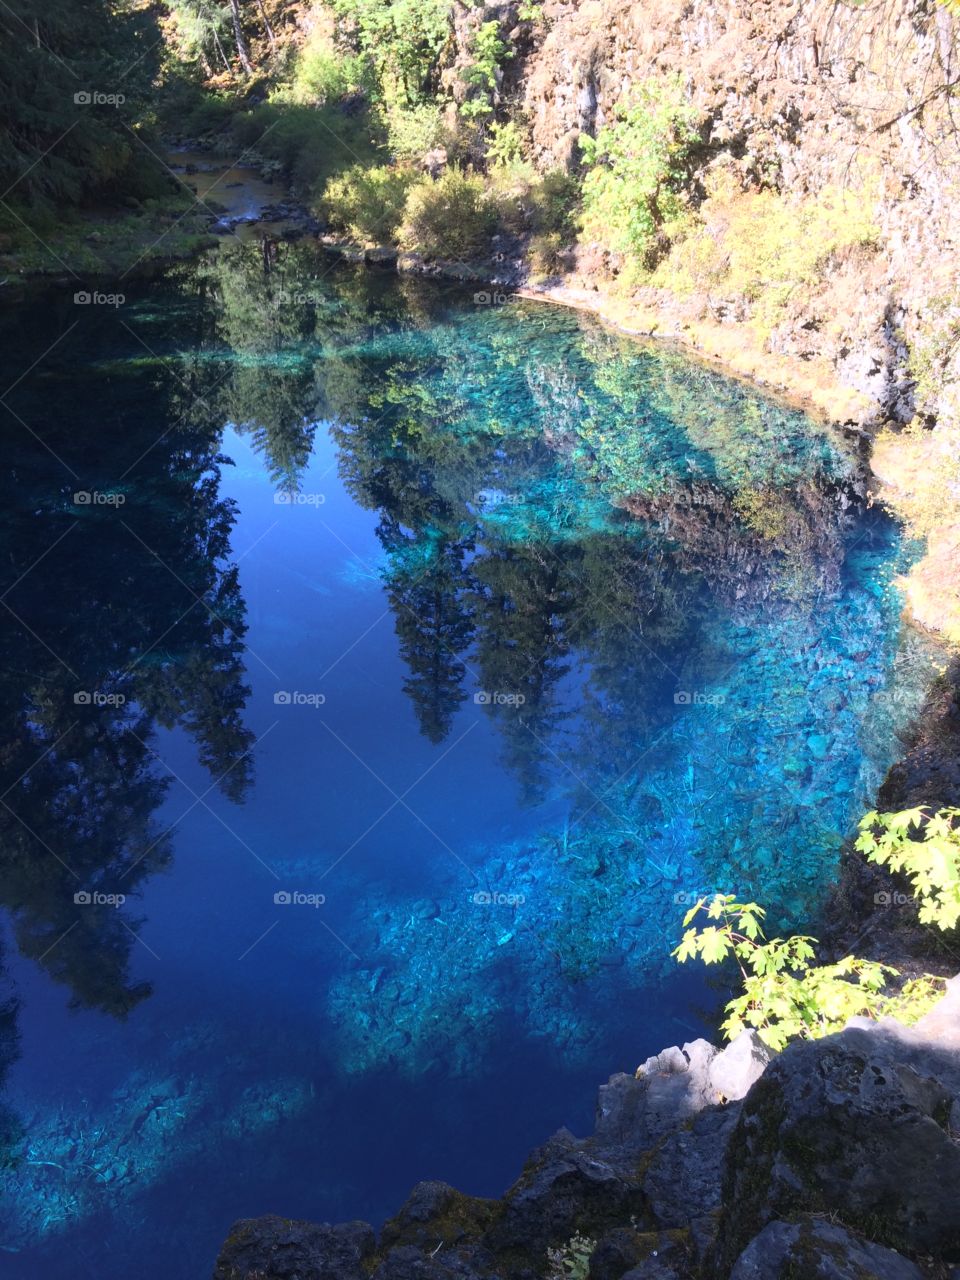 blue Pool. Today's hike on the Mckenzie river